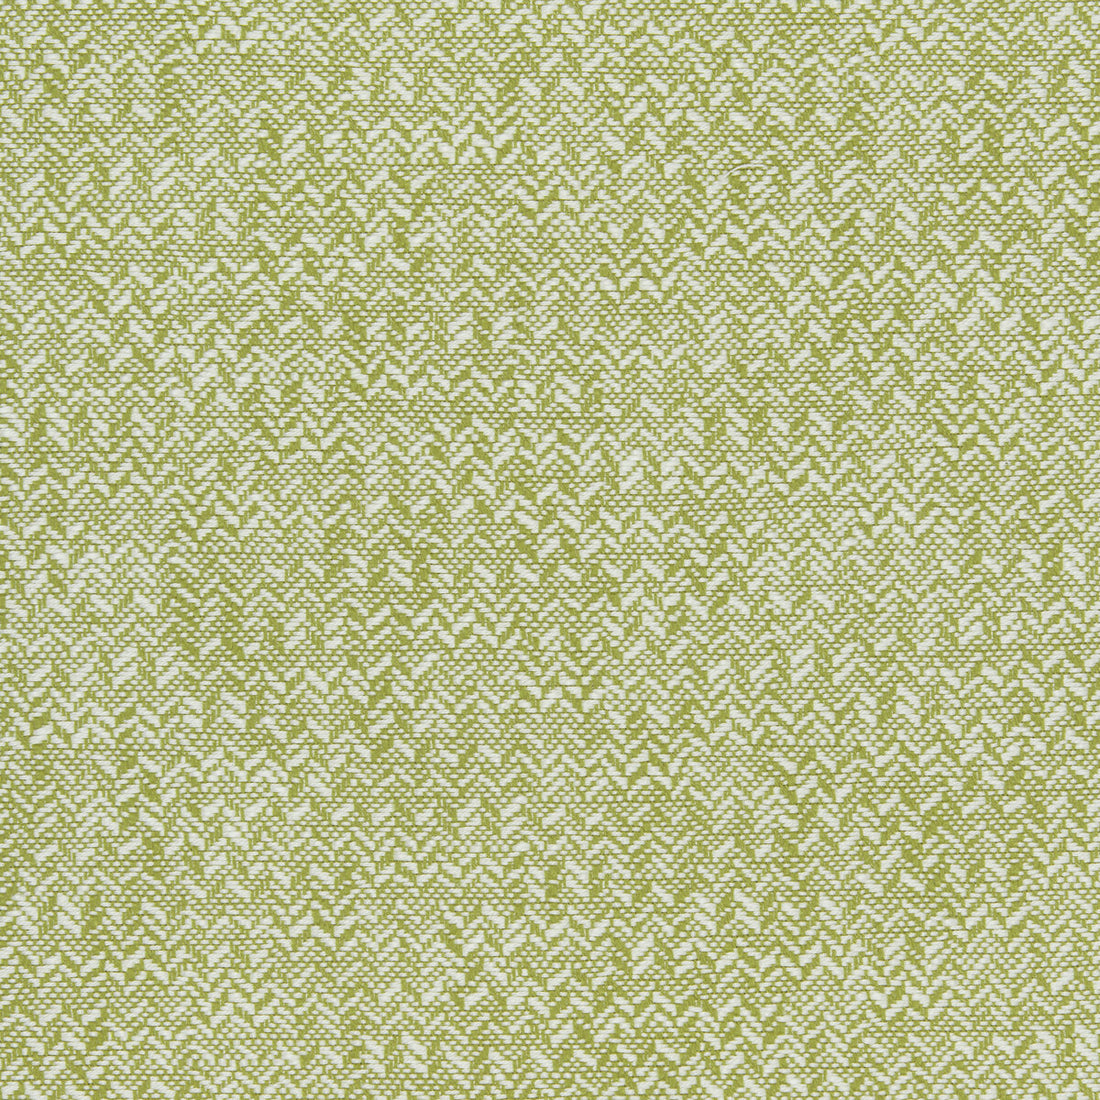 Kravet Design fabric in 36089-3 color - pattern 36089.3.0 - by Kravet Design in the Inside Out Performance Fabrics collection